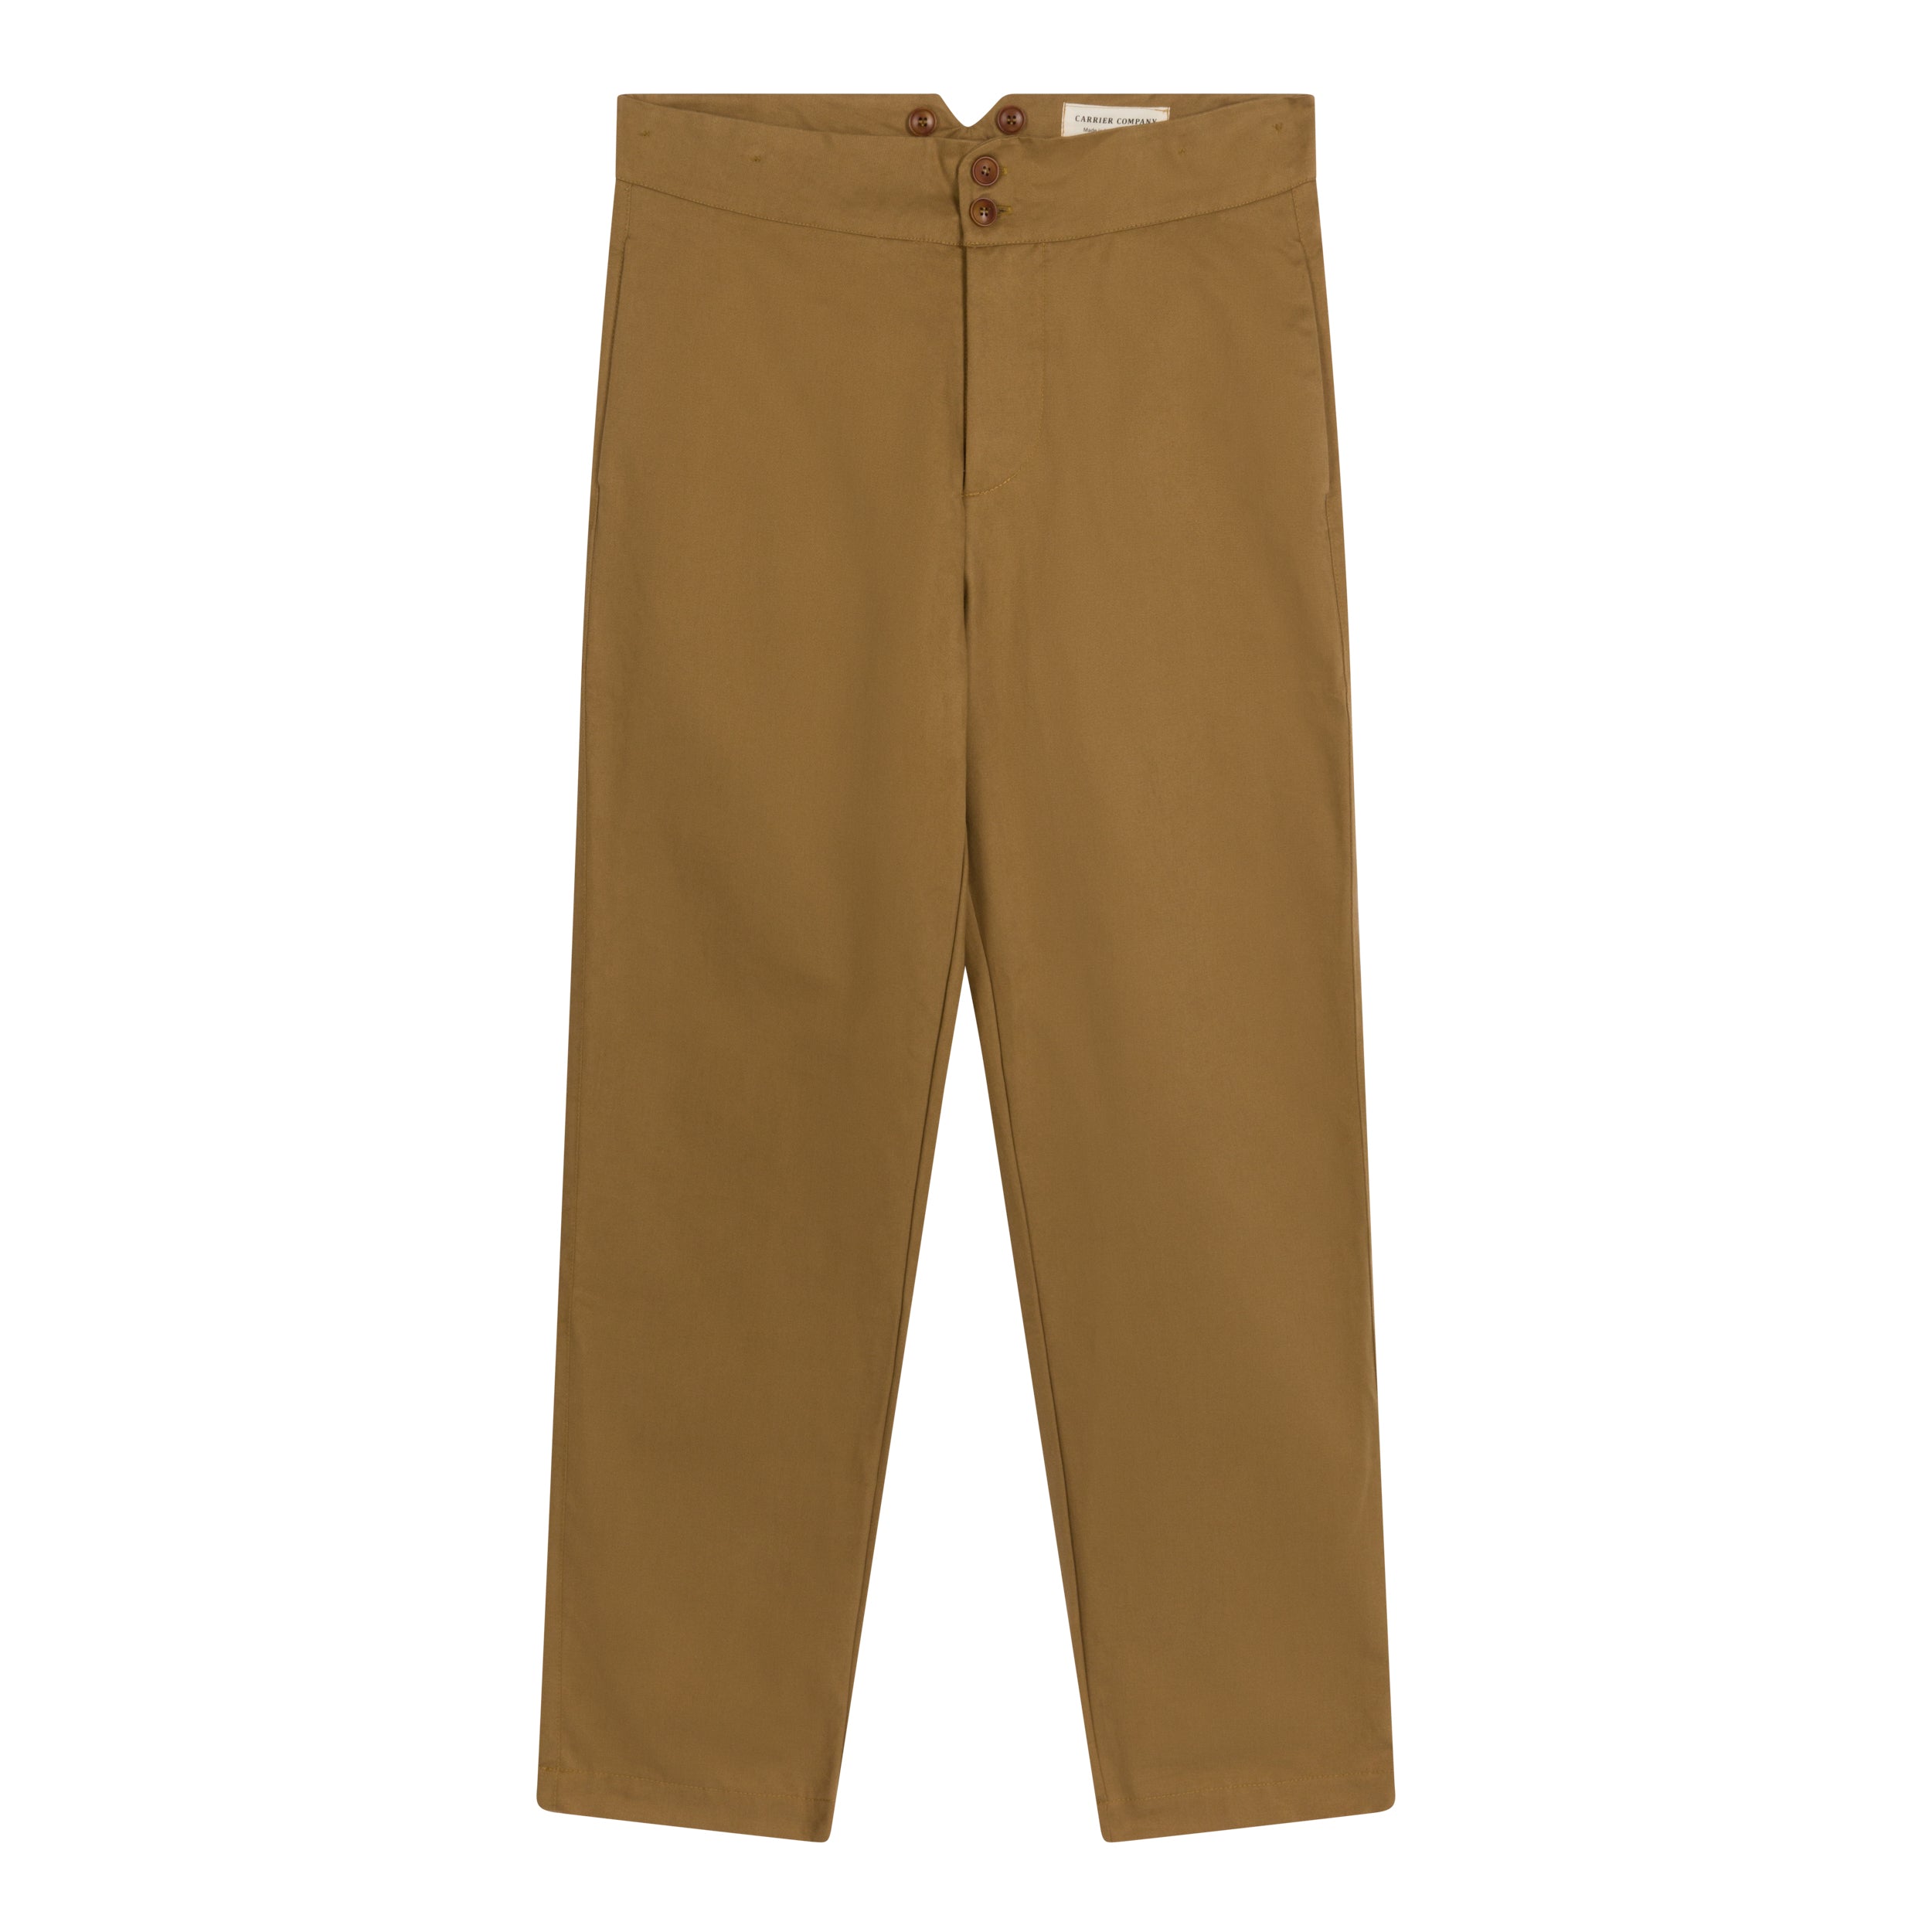 Carrier Company High Waisted Trouser in Tan